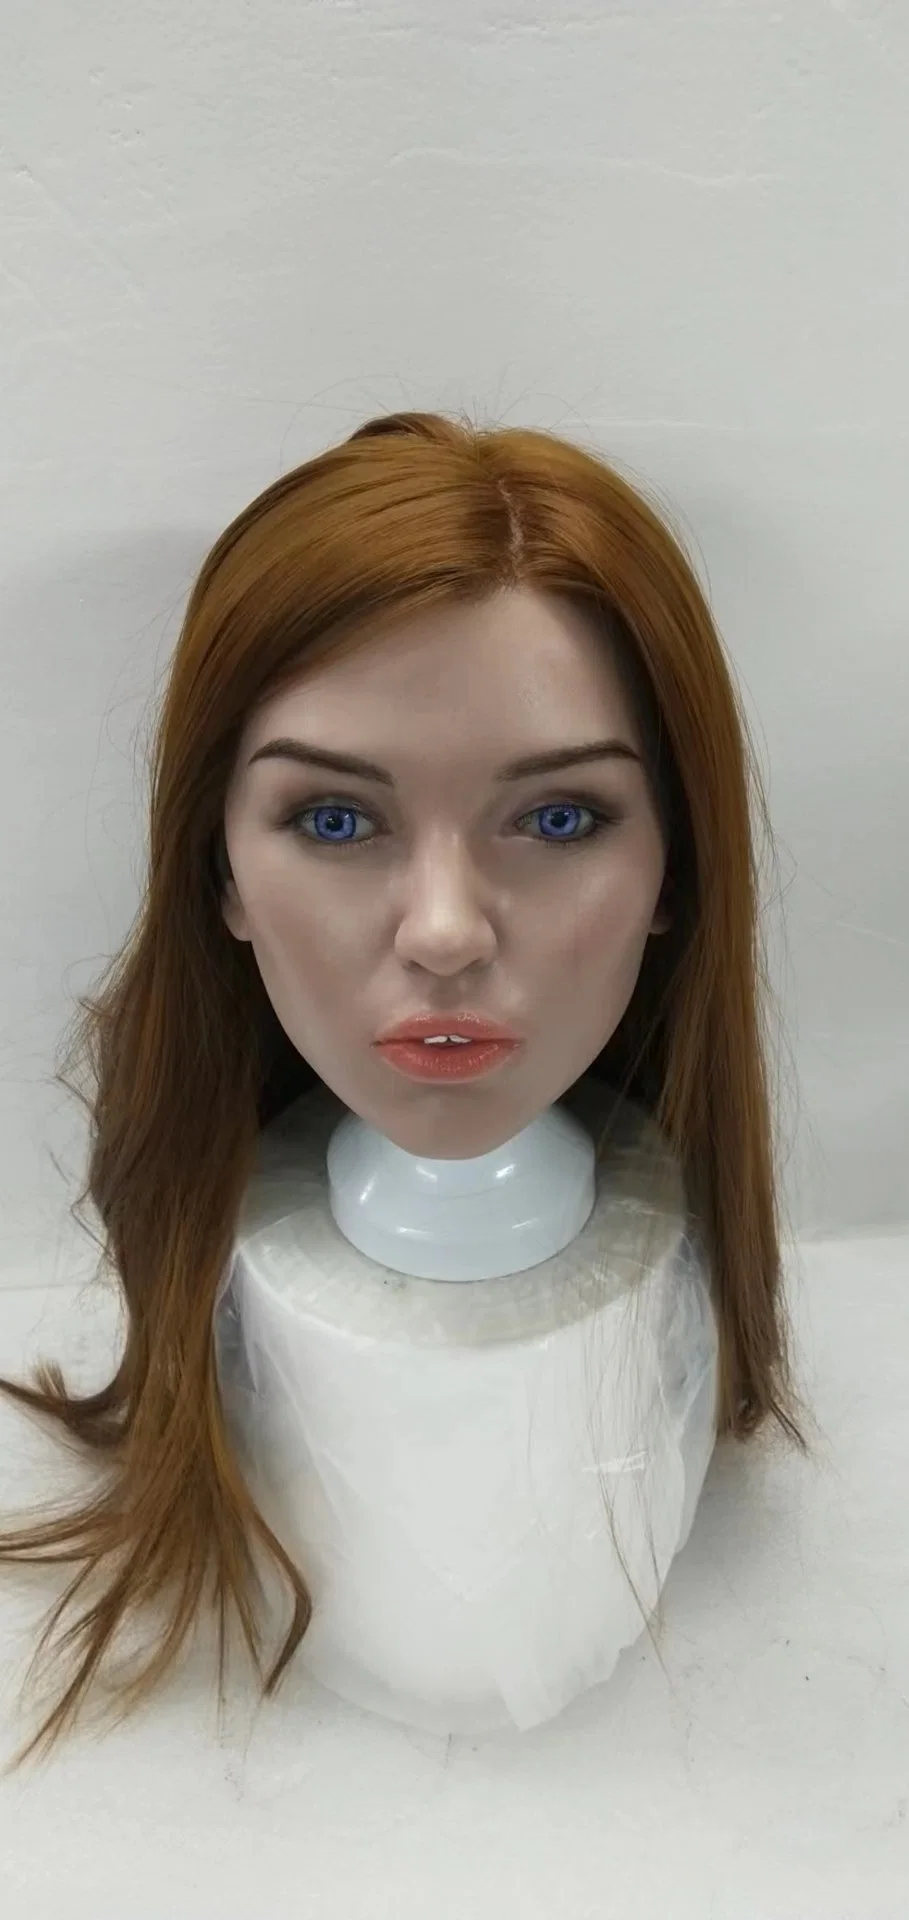 Jarliet Doll Silicone Sex Doll Head Sex Product Love Doll for Ma